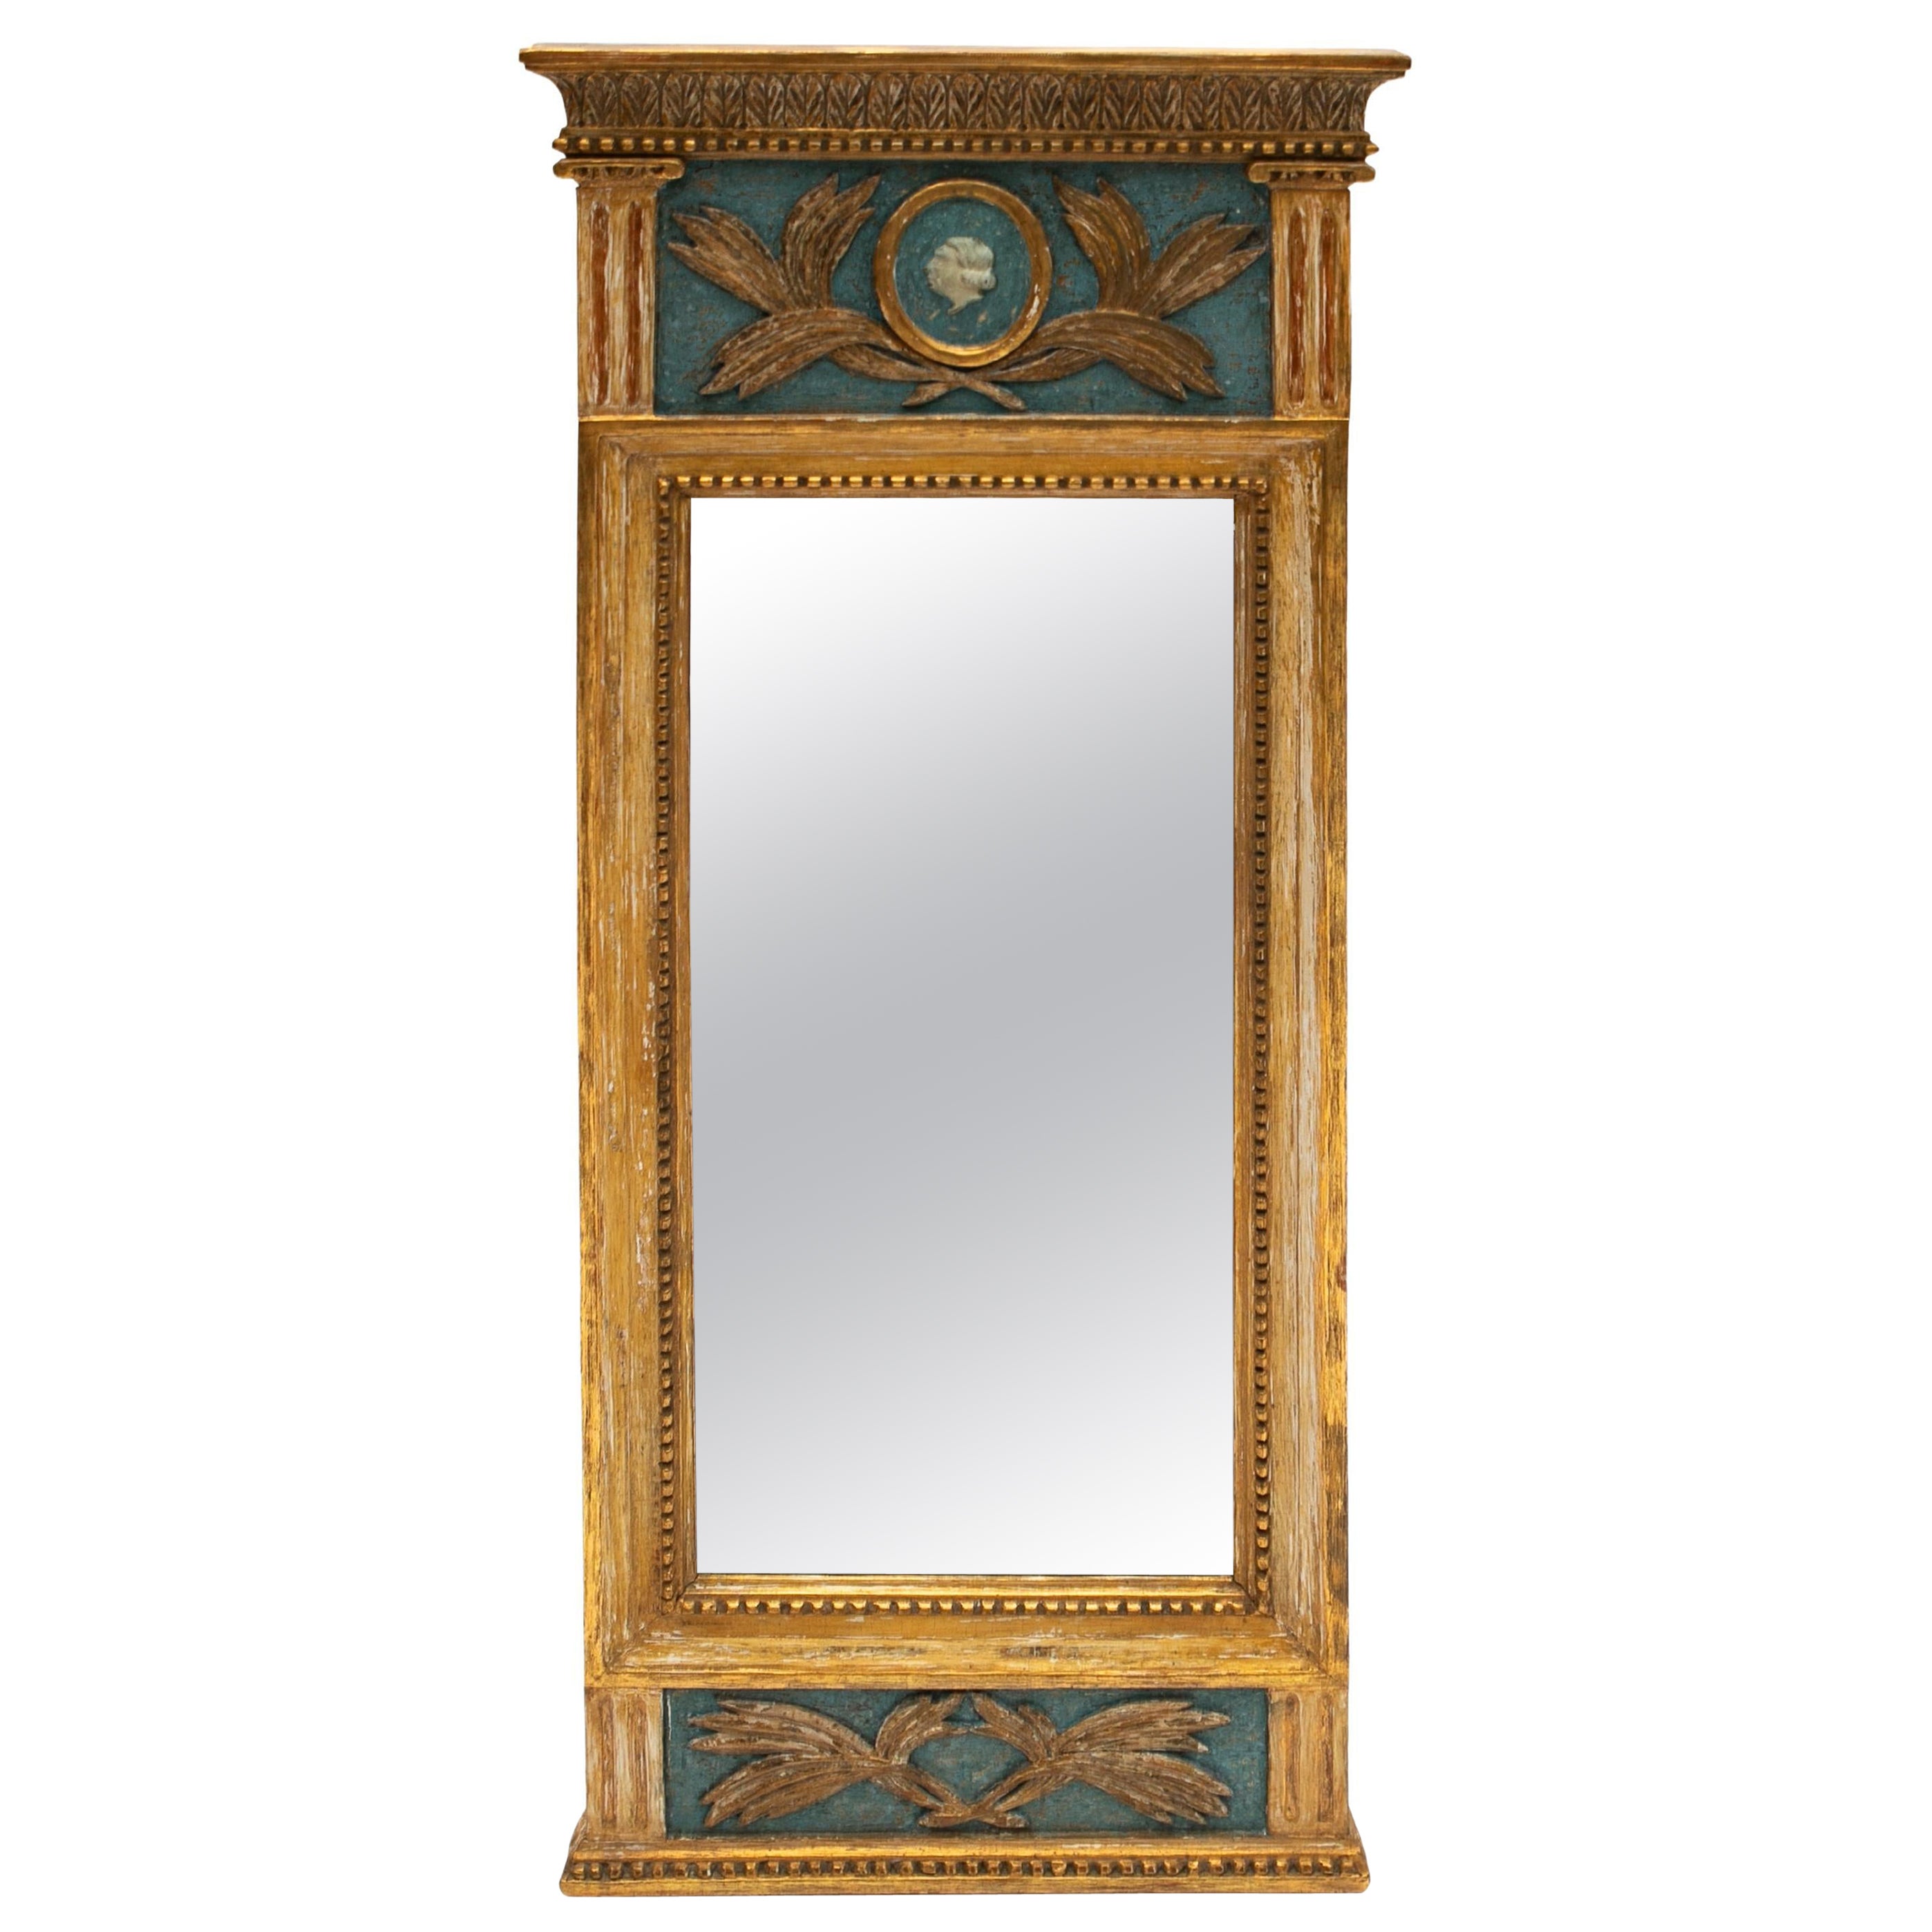 Gustavian Mirrors - 59 For Sale at 1stDibs  antique swedish mirror,  gustavian style mirrors, gustavian antiques